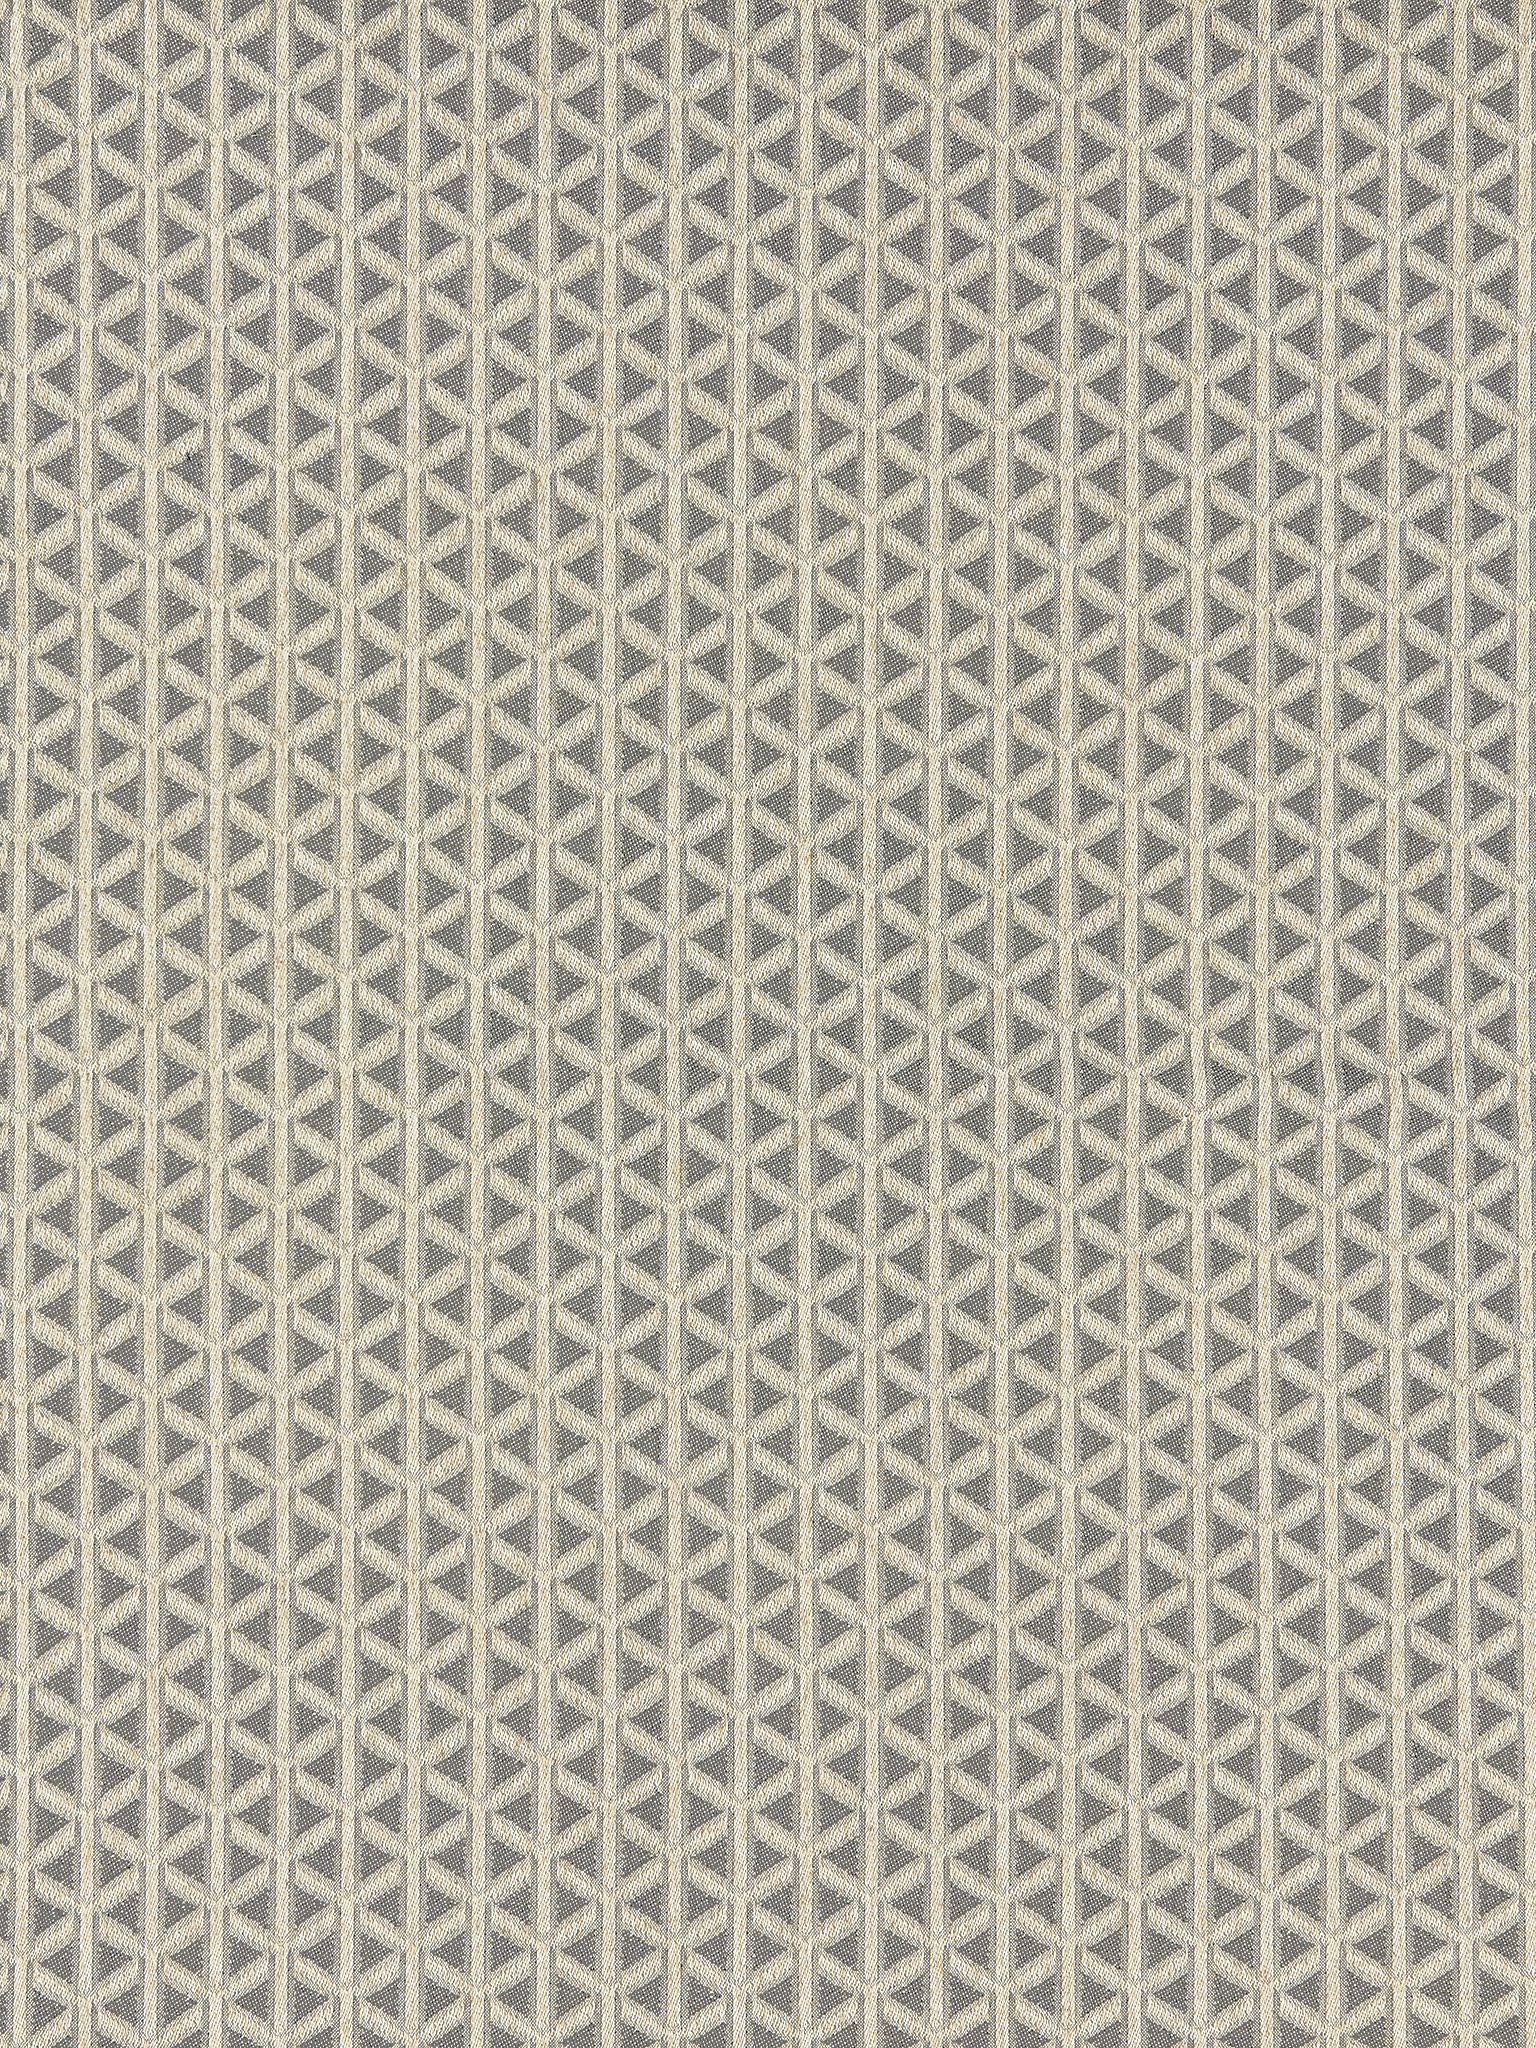 Cross Channel fabric in newsprint color - pattern number NK 0007CROS - by Scalamandre in the Old World Weavers collection